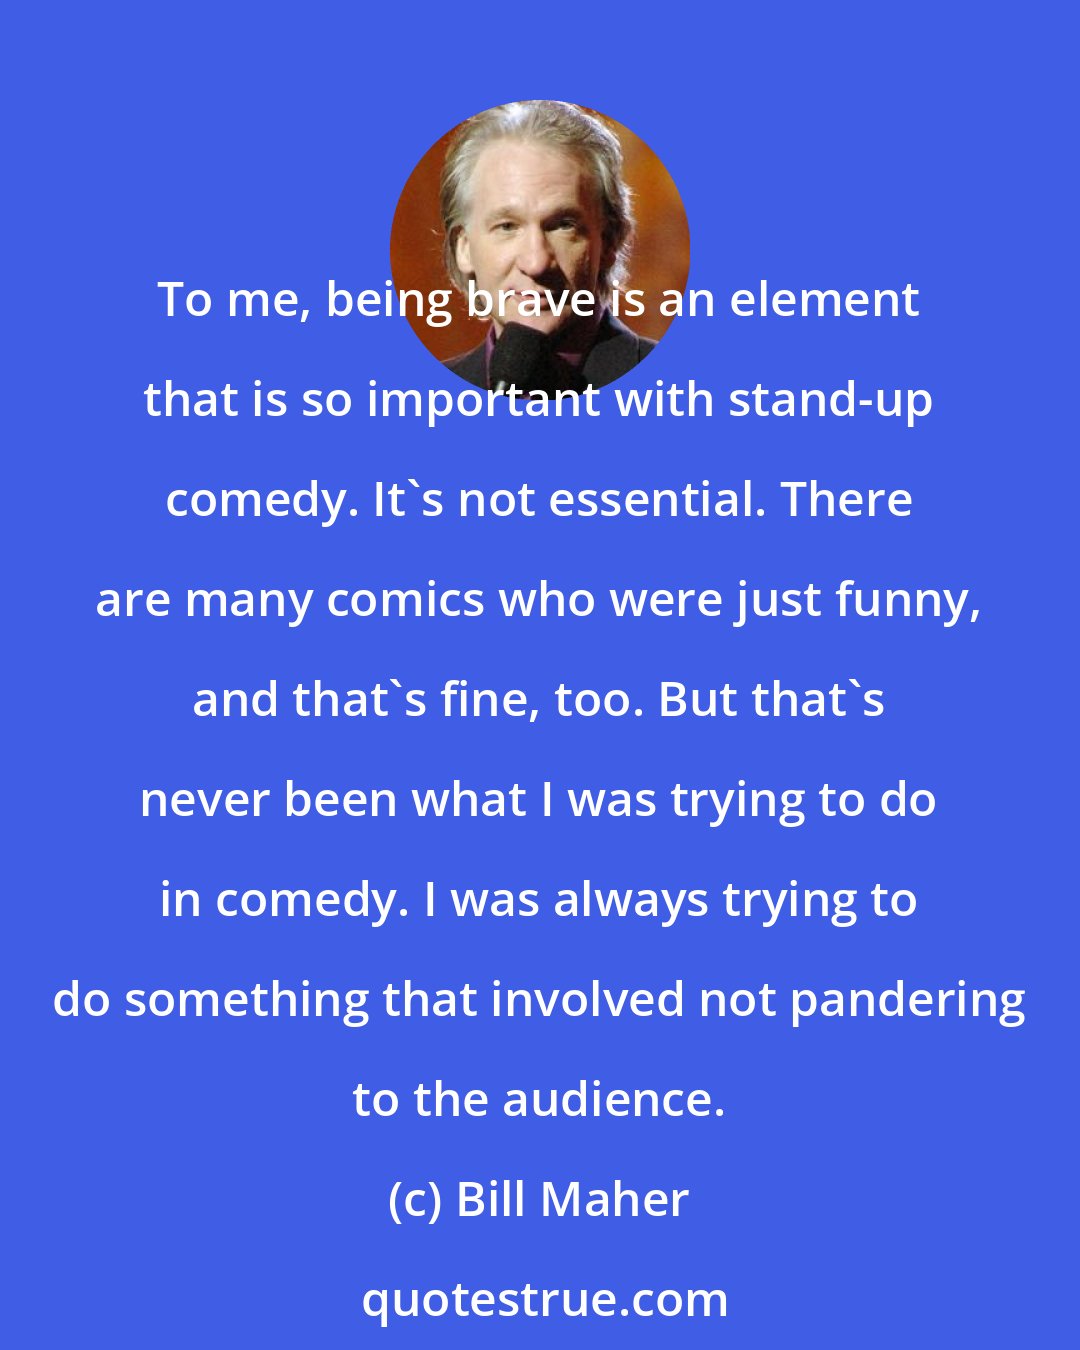 Bill Maher: To me, being brave is an element that is so important with stand-up comedy. It's not essential. There are many comics who were just funny, and that's fine, too. But that's never been what I was trying to do in comedy. I was always trying to do something that involved not pandering to the audience.